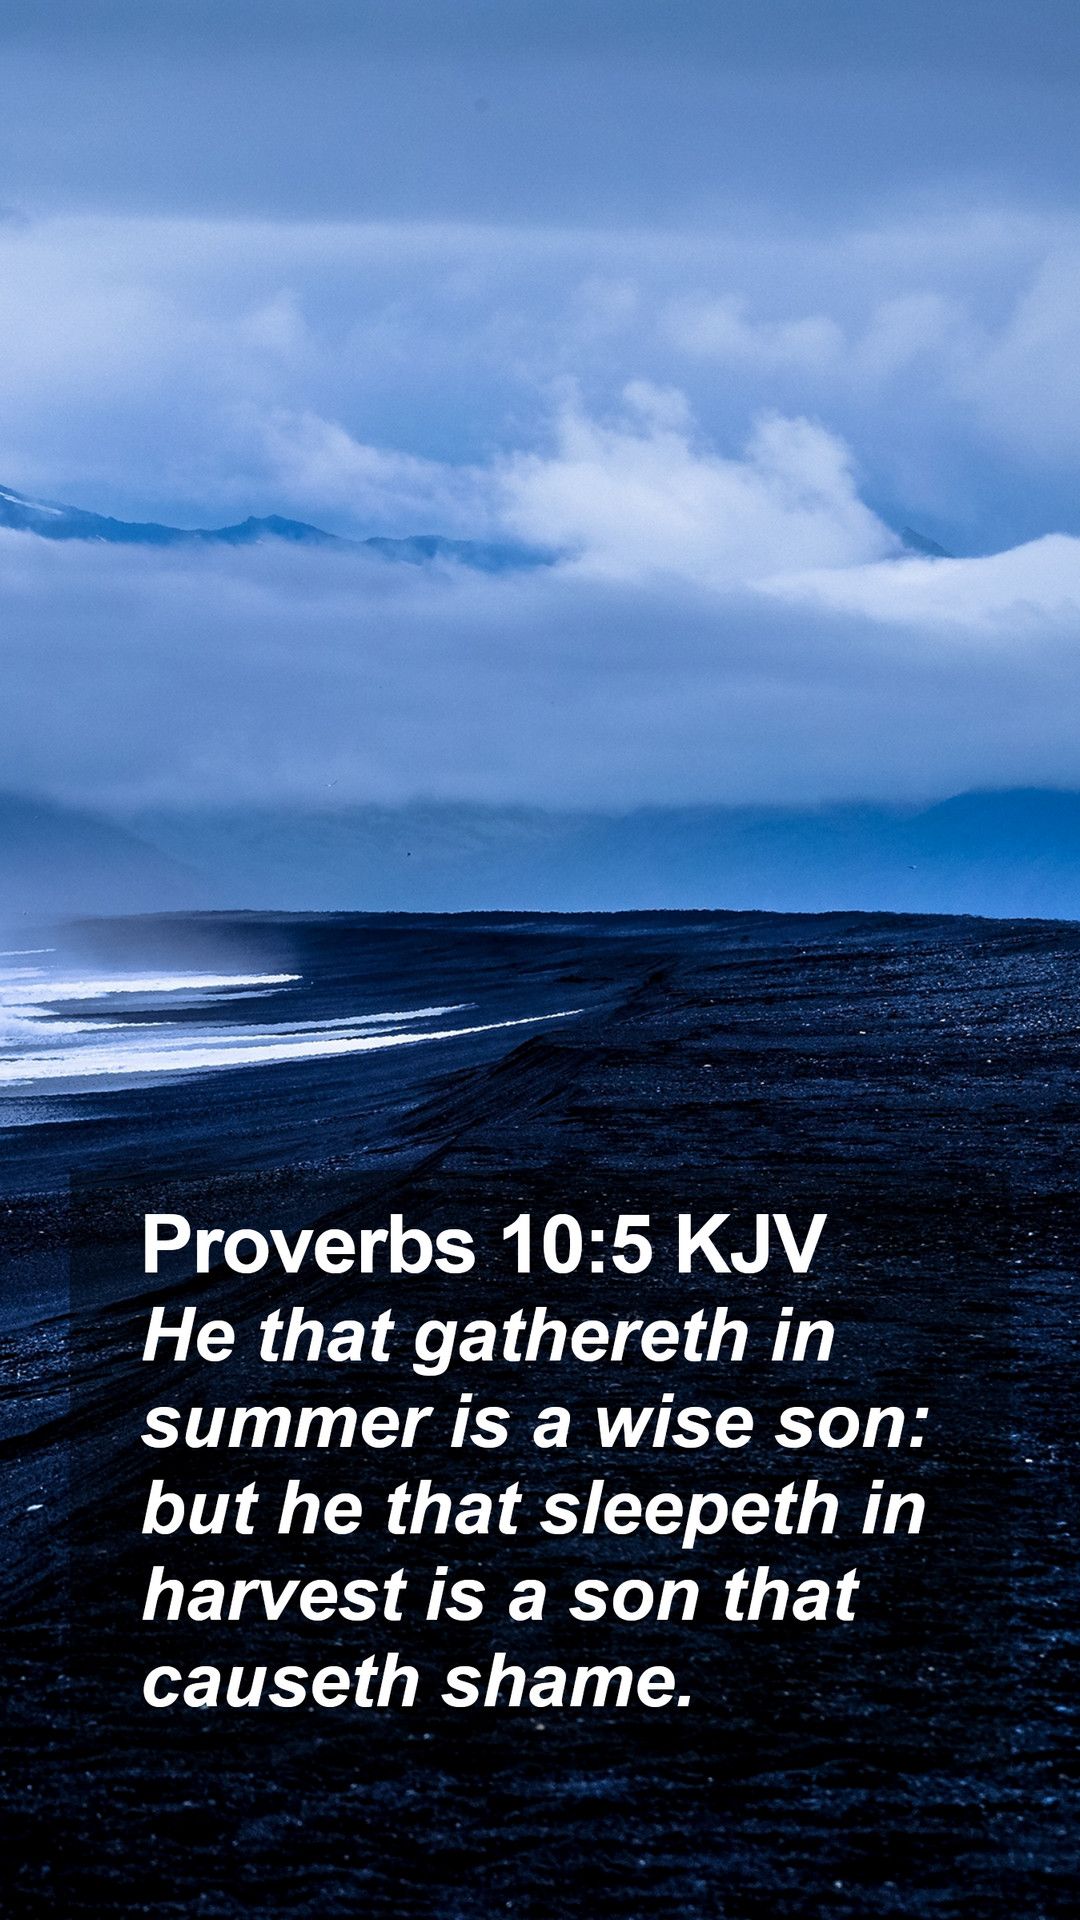 Proverbs 10:5 KJV Mobile Phone Wallpaper that gathereth in summer is a wise son: but he